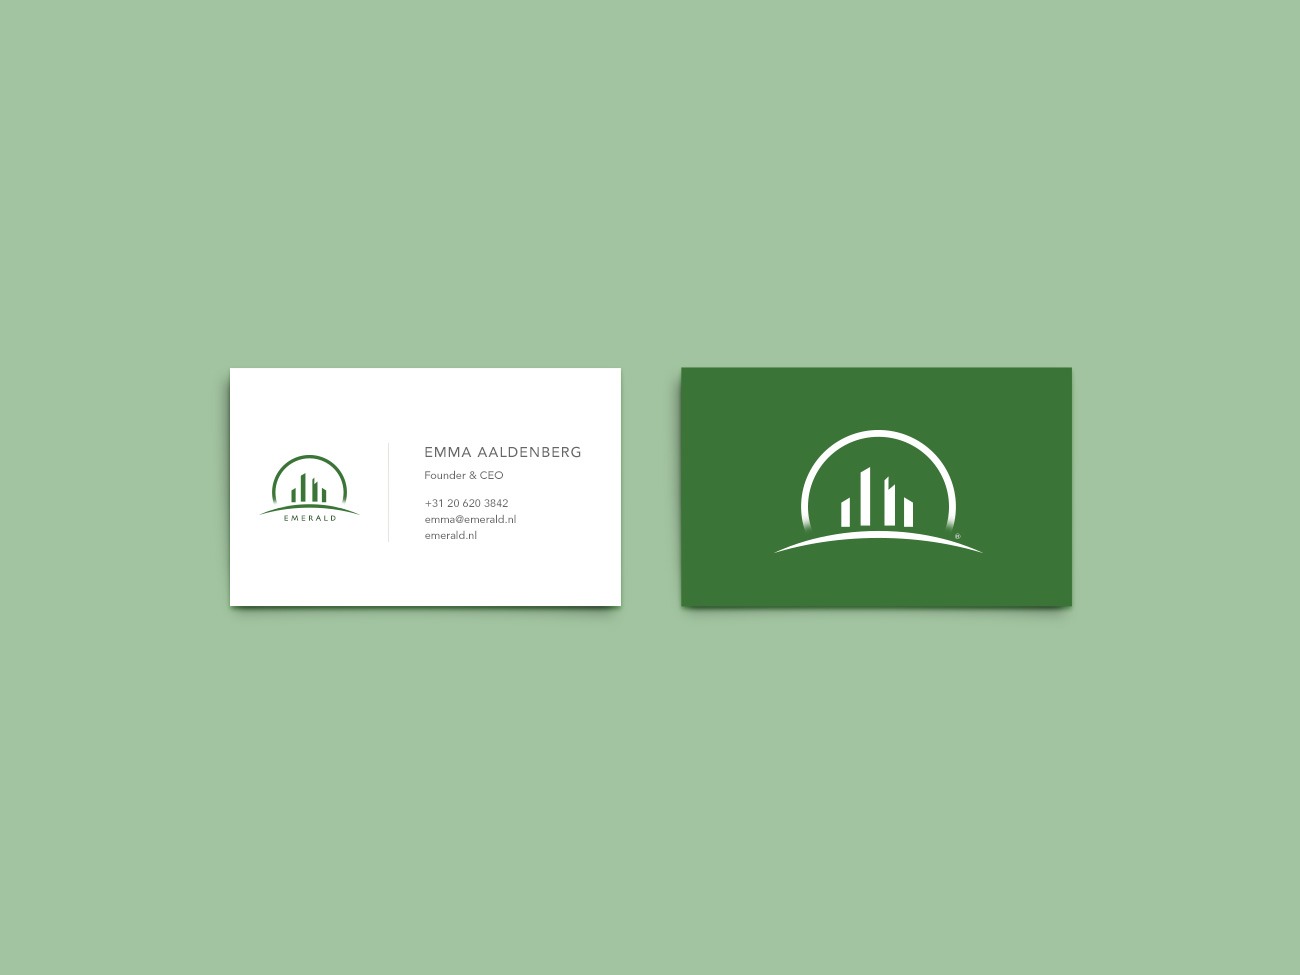 Emerald Investments Branding and Business Card Design